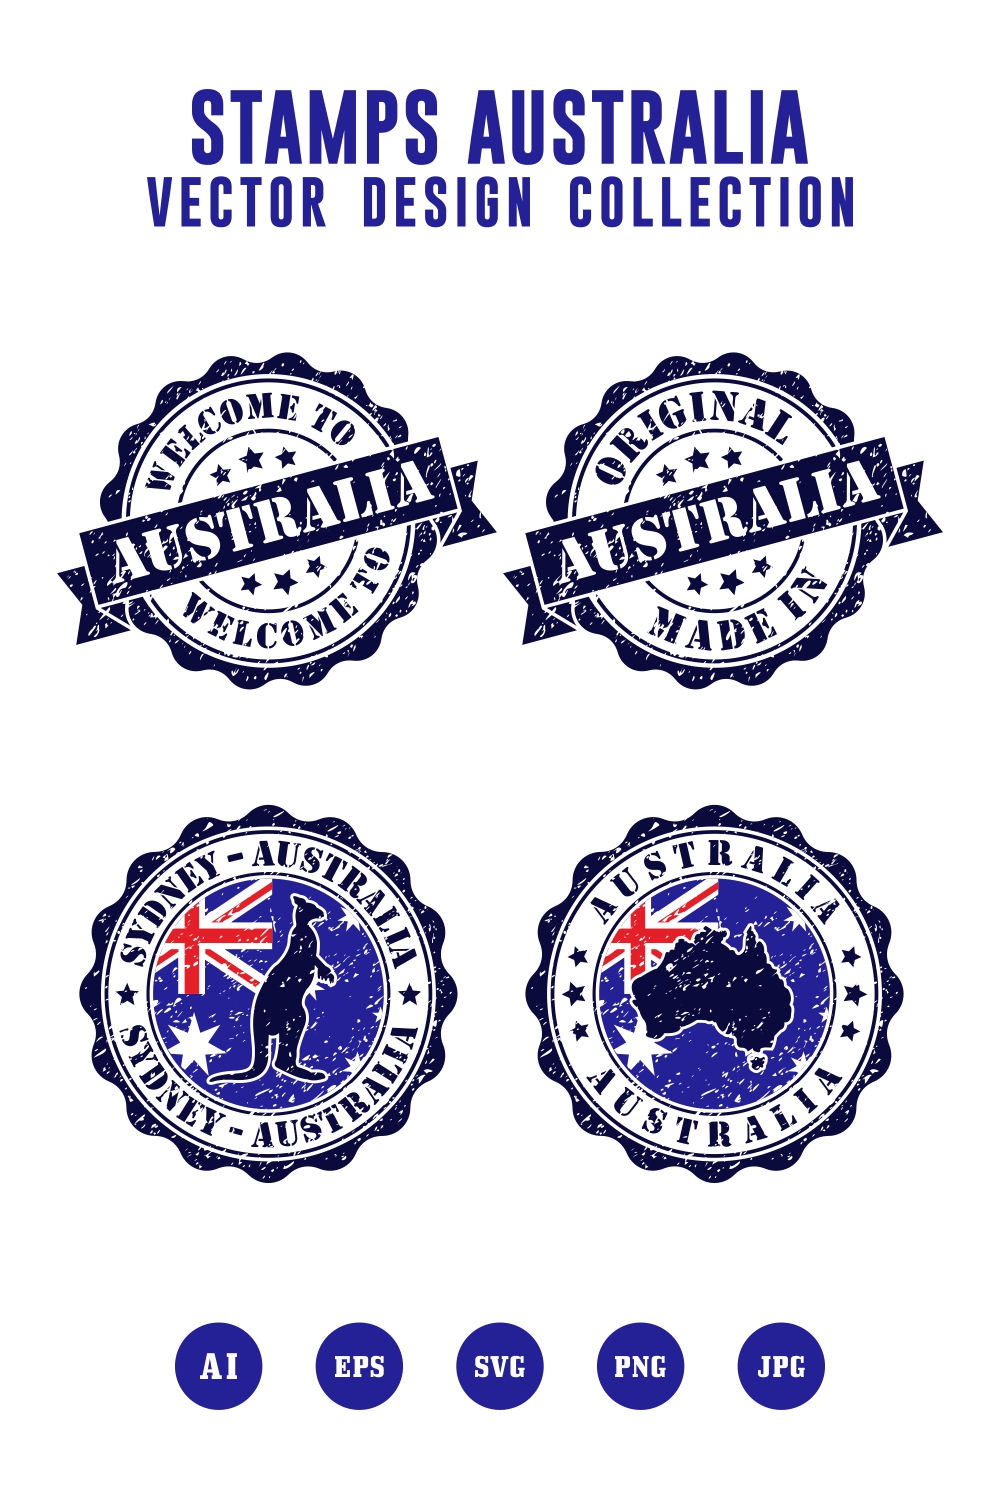 welcome to Sydney Australia stamps logo design collection - $4 pinterest preview image.